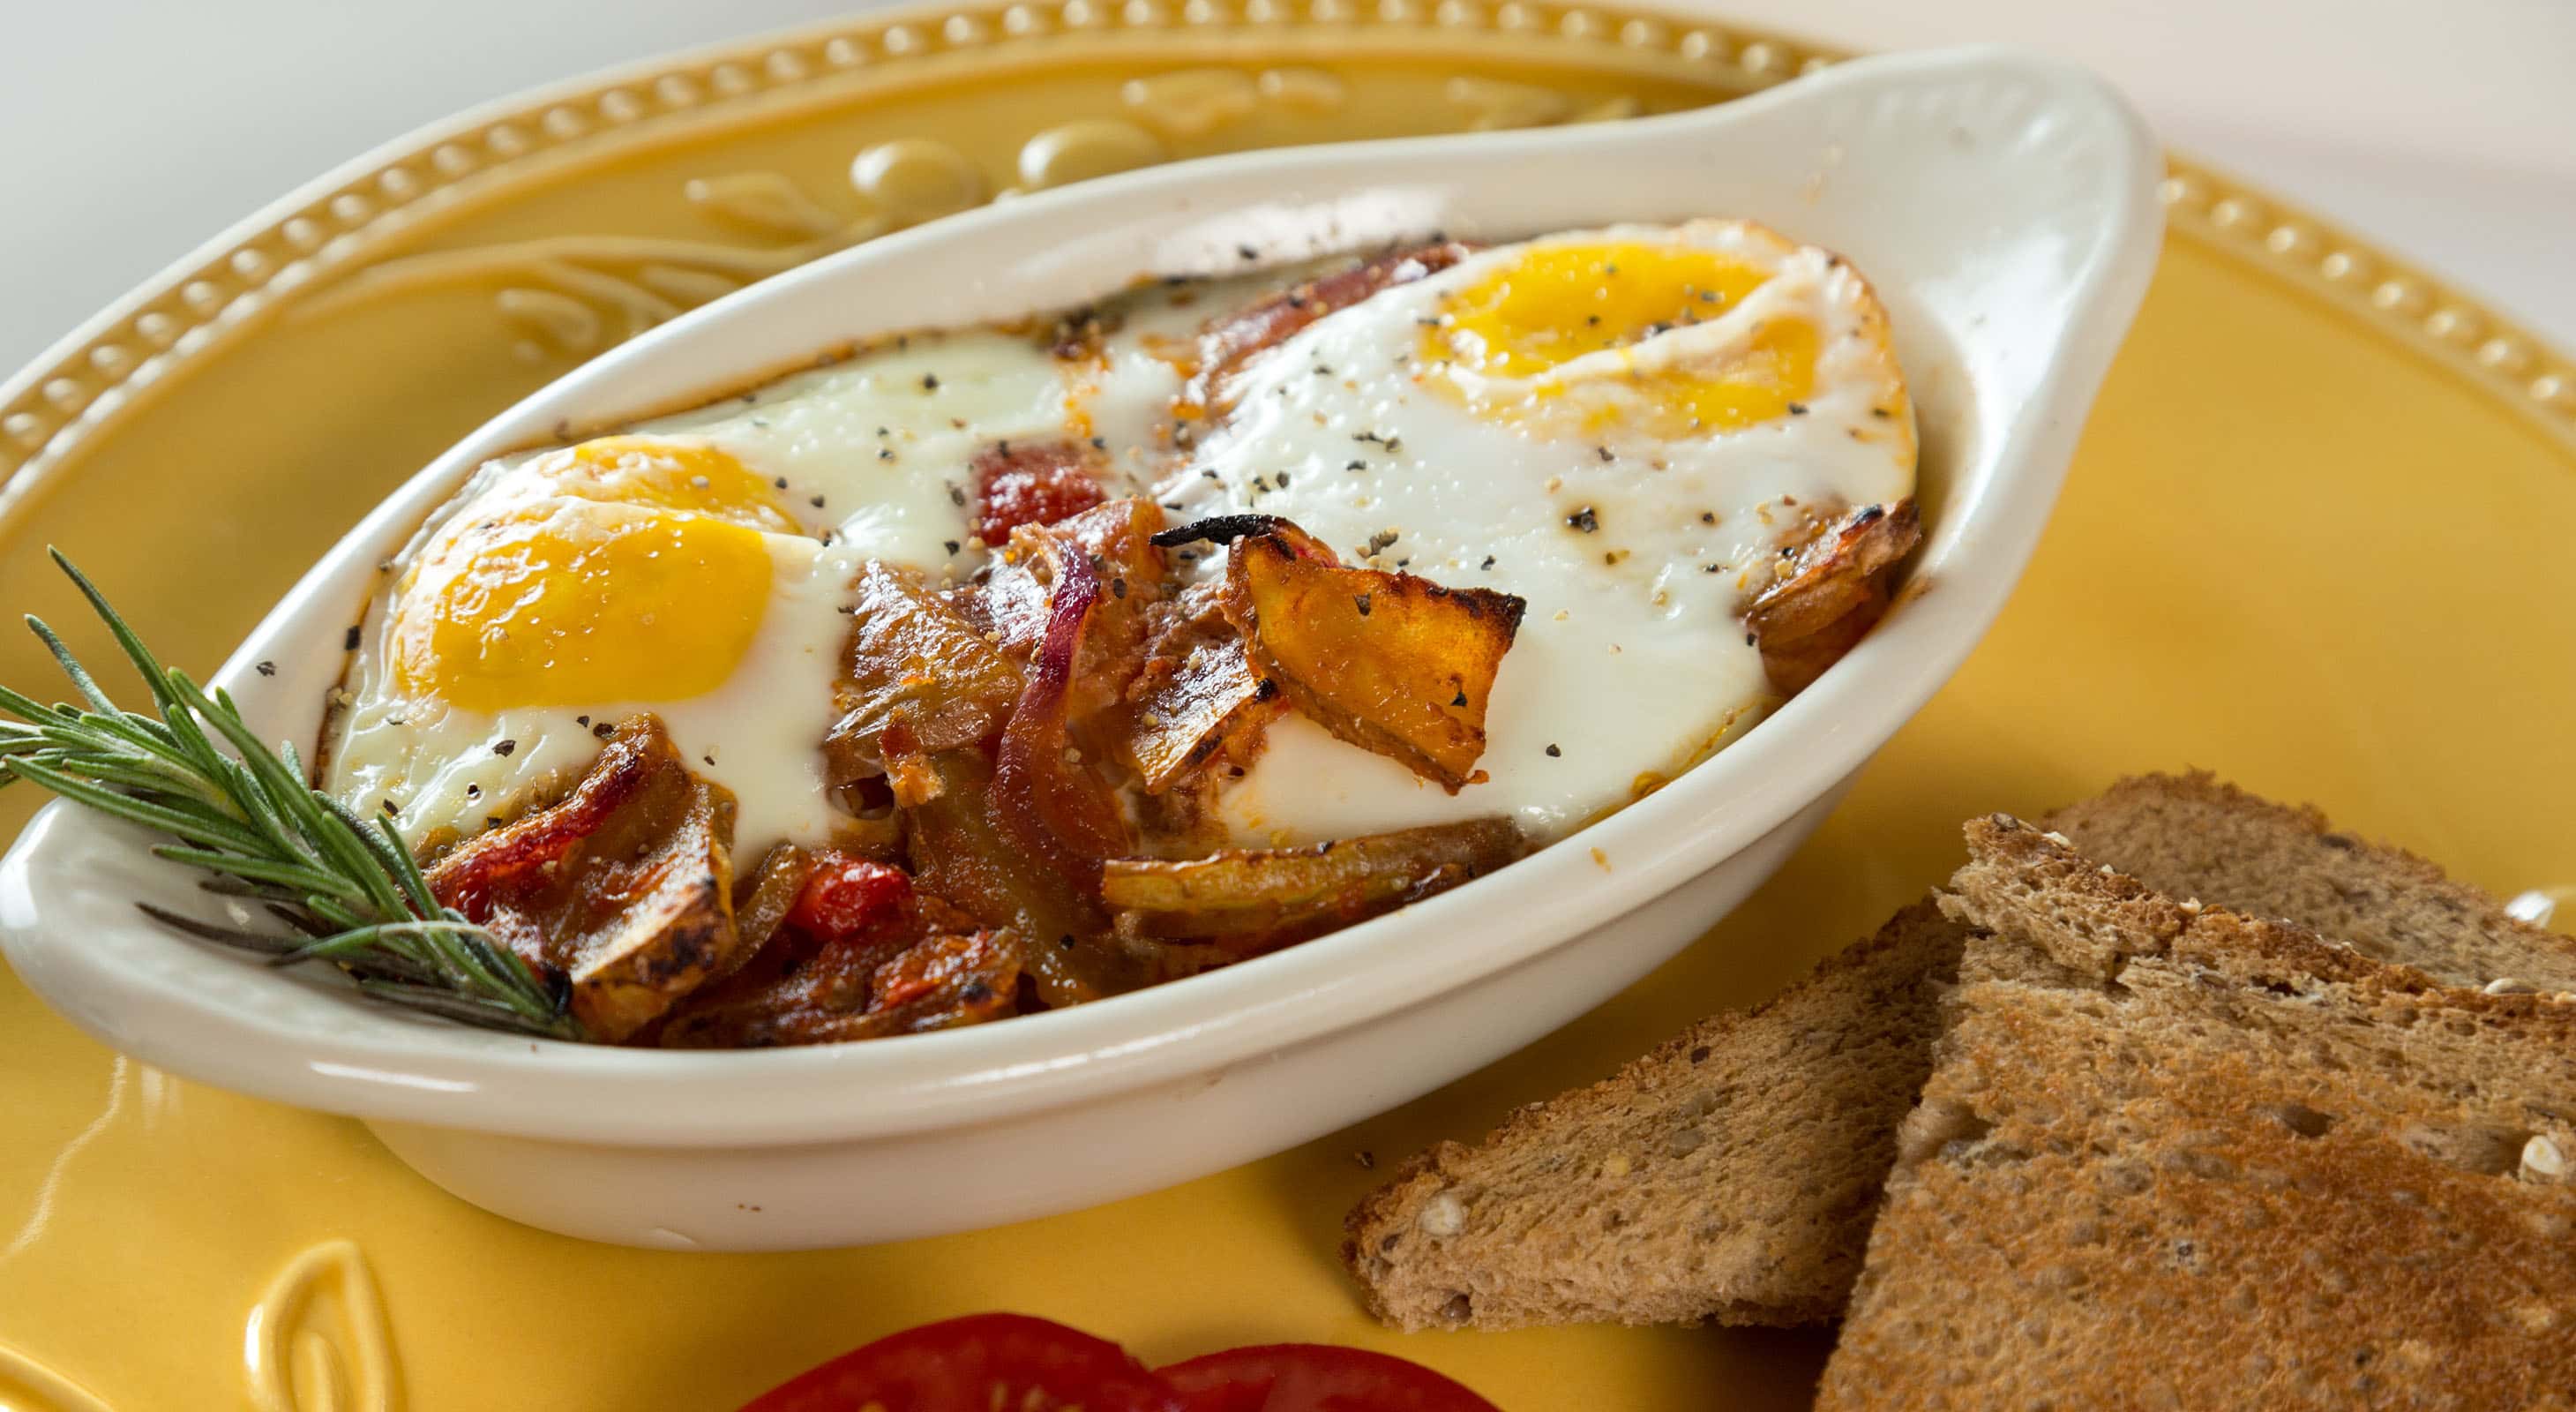 Boat-shaped dish with fried eggs and bacon